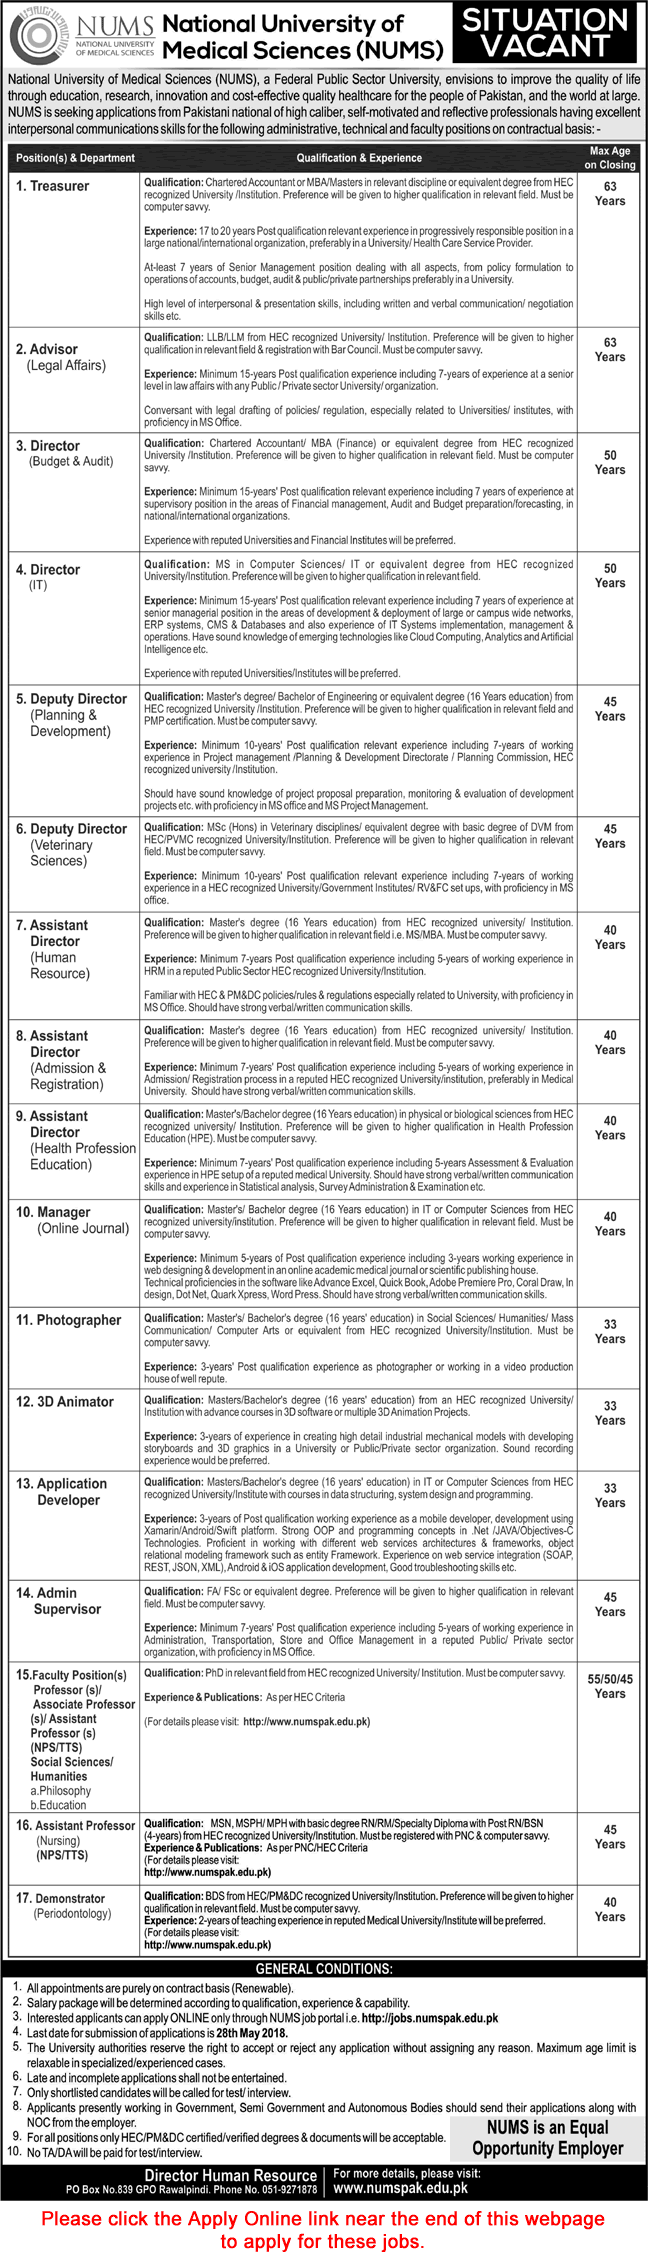 NUMS University Rawalpindi Jobs May 2018 Apply Online Teaching Faculty & Others Latest